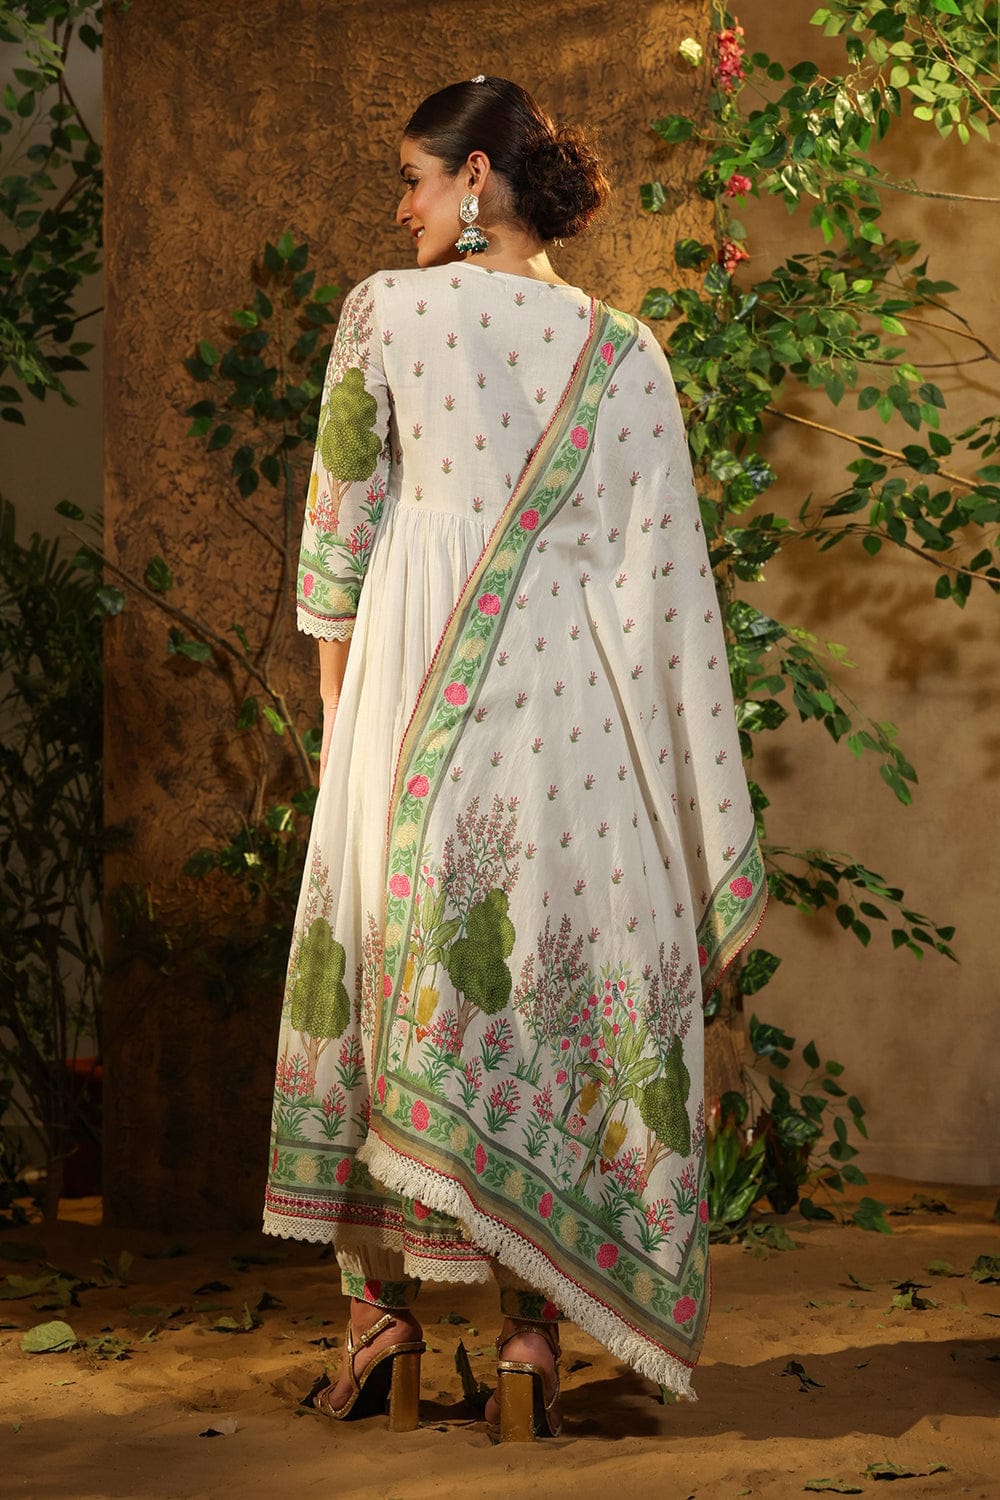 Muslin Alia Cut Suit Set in Digital Shine Prints and Hand Embroidery - Rent